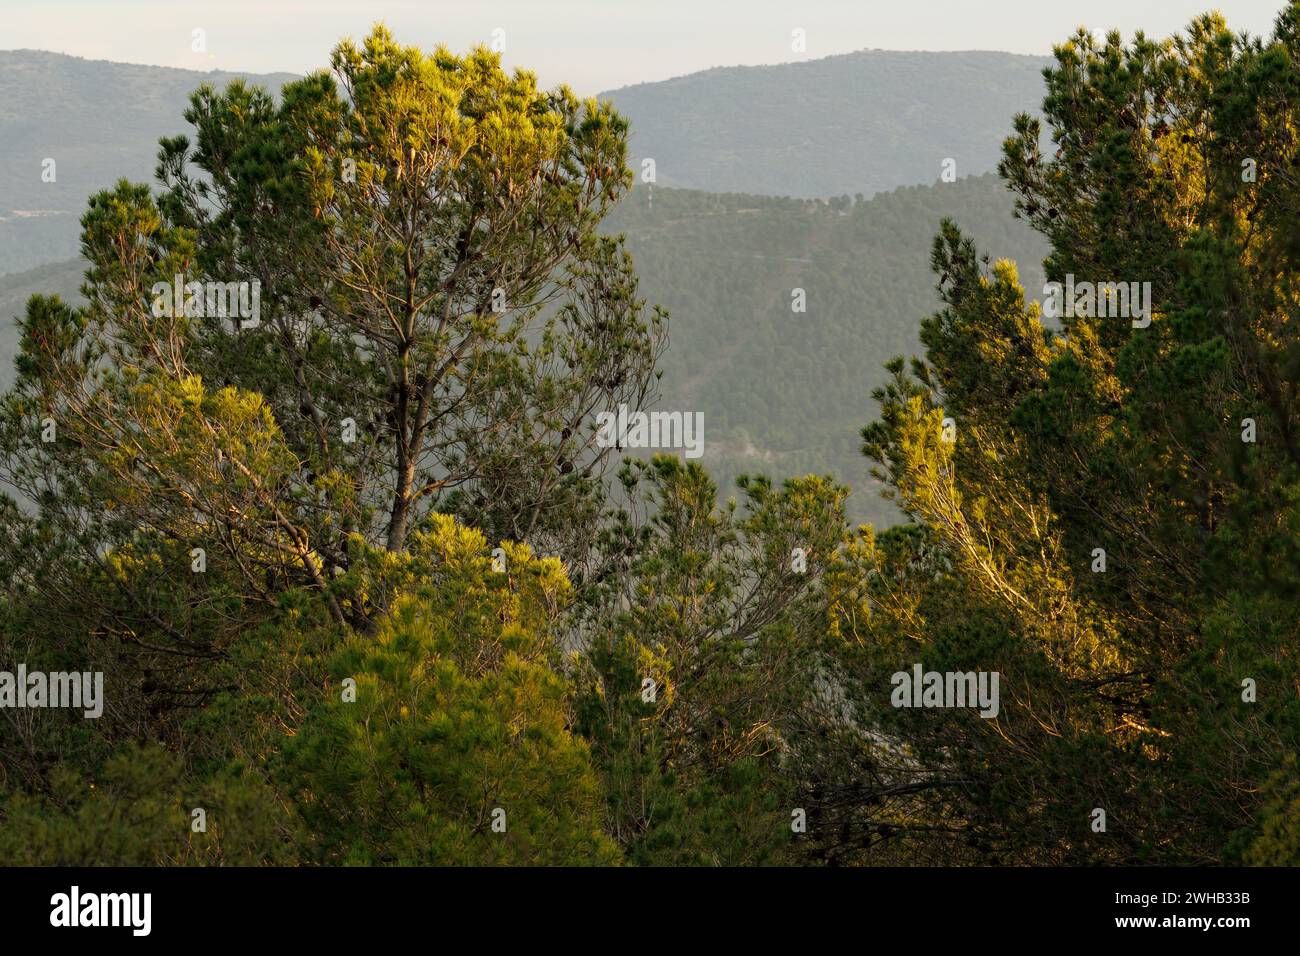 Landscape and evening light over pine trees in the forest, Alcoi, Spain Stock Photo